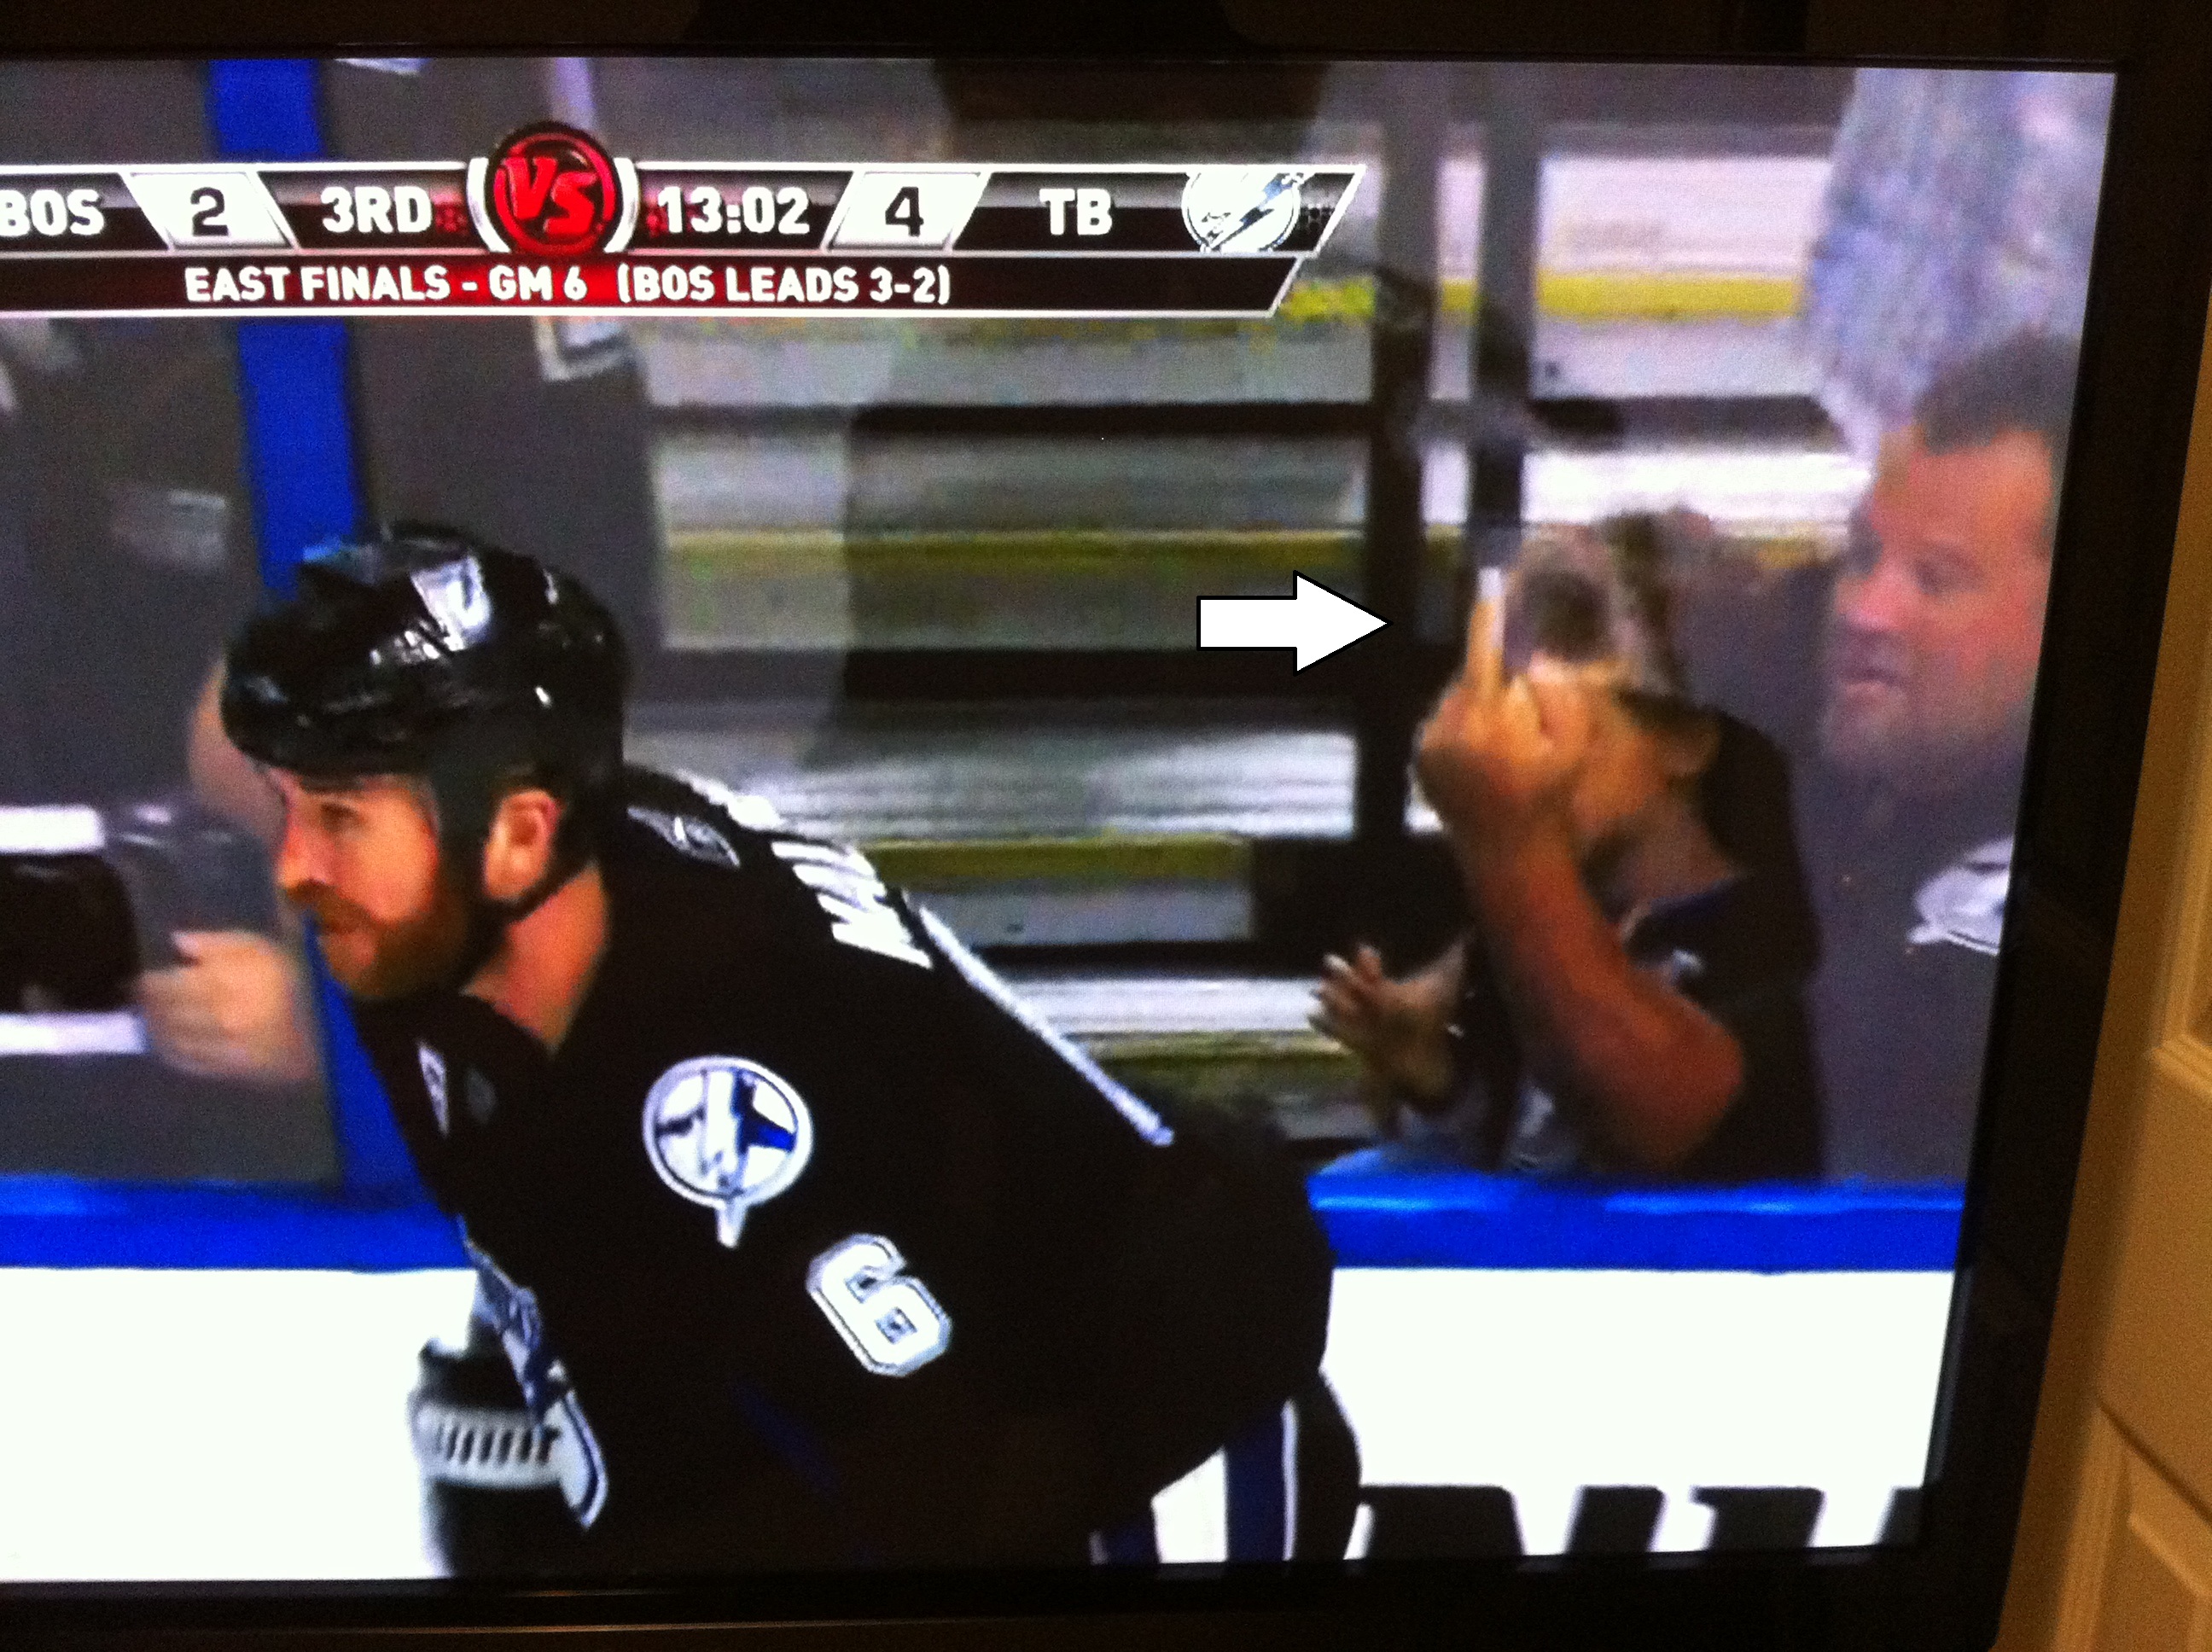 A hockey fan holds his kid in one arm while using the other to throw up a bird at a Boston Bruins player on national television during the Eastern Conference finals. Father of the year?